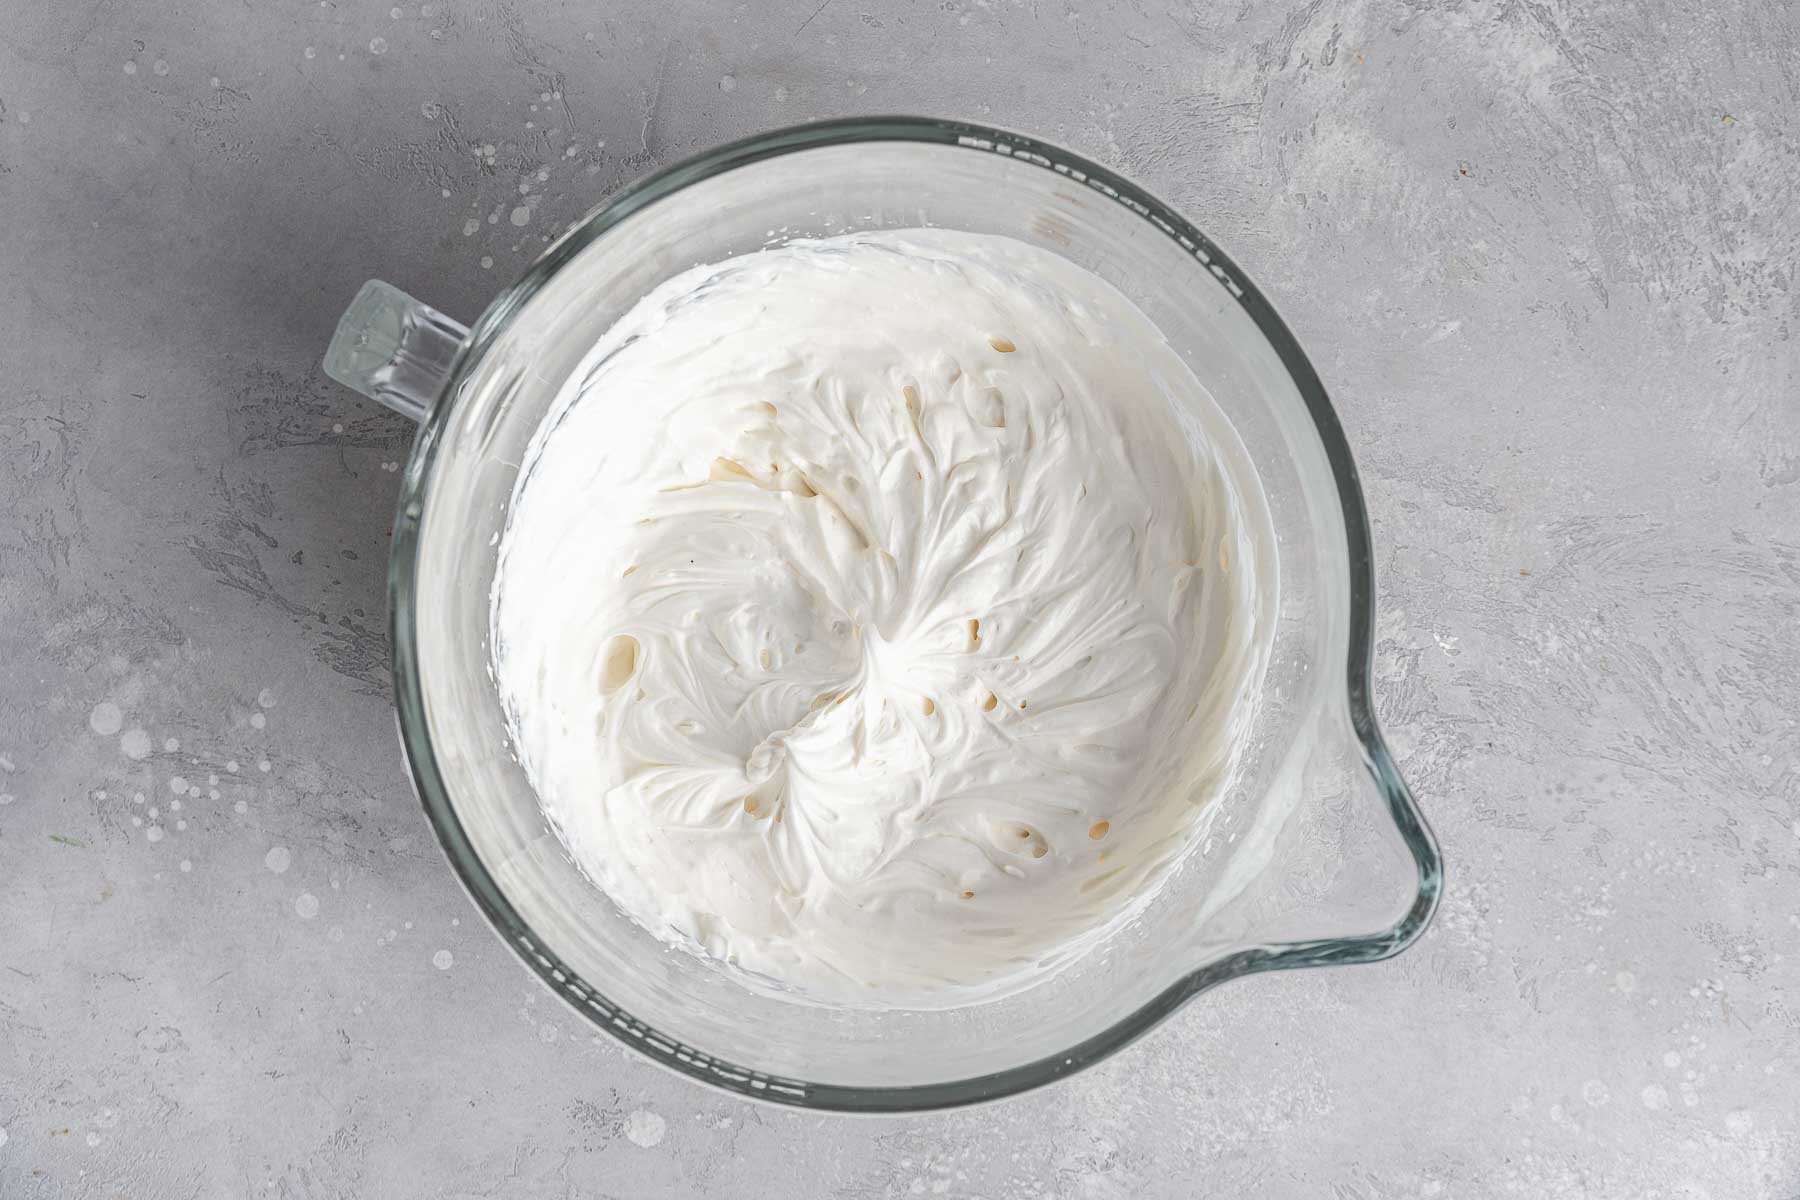 Whipped cream cream cheese frosting in clear mixing bowl.